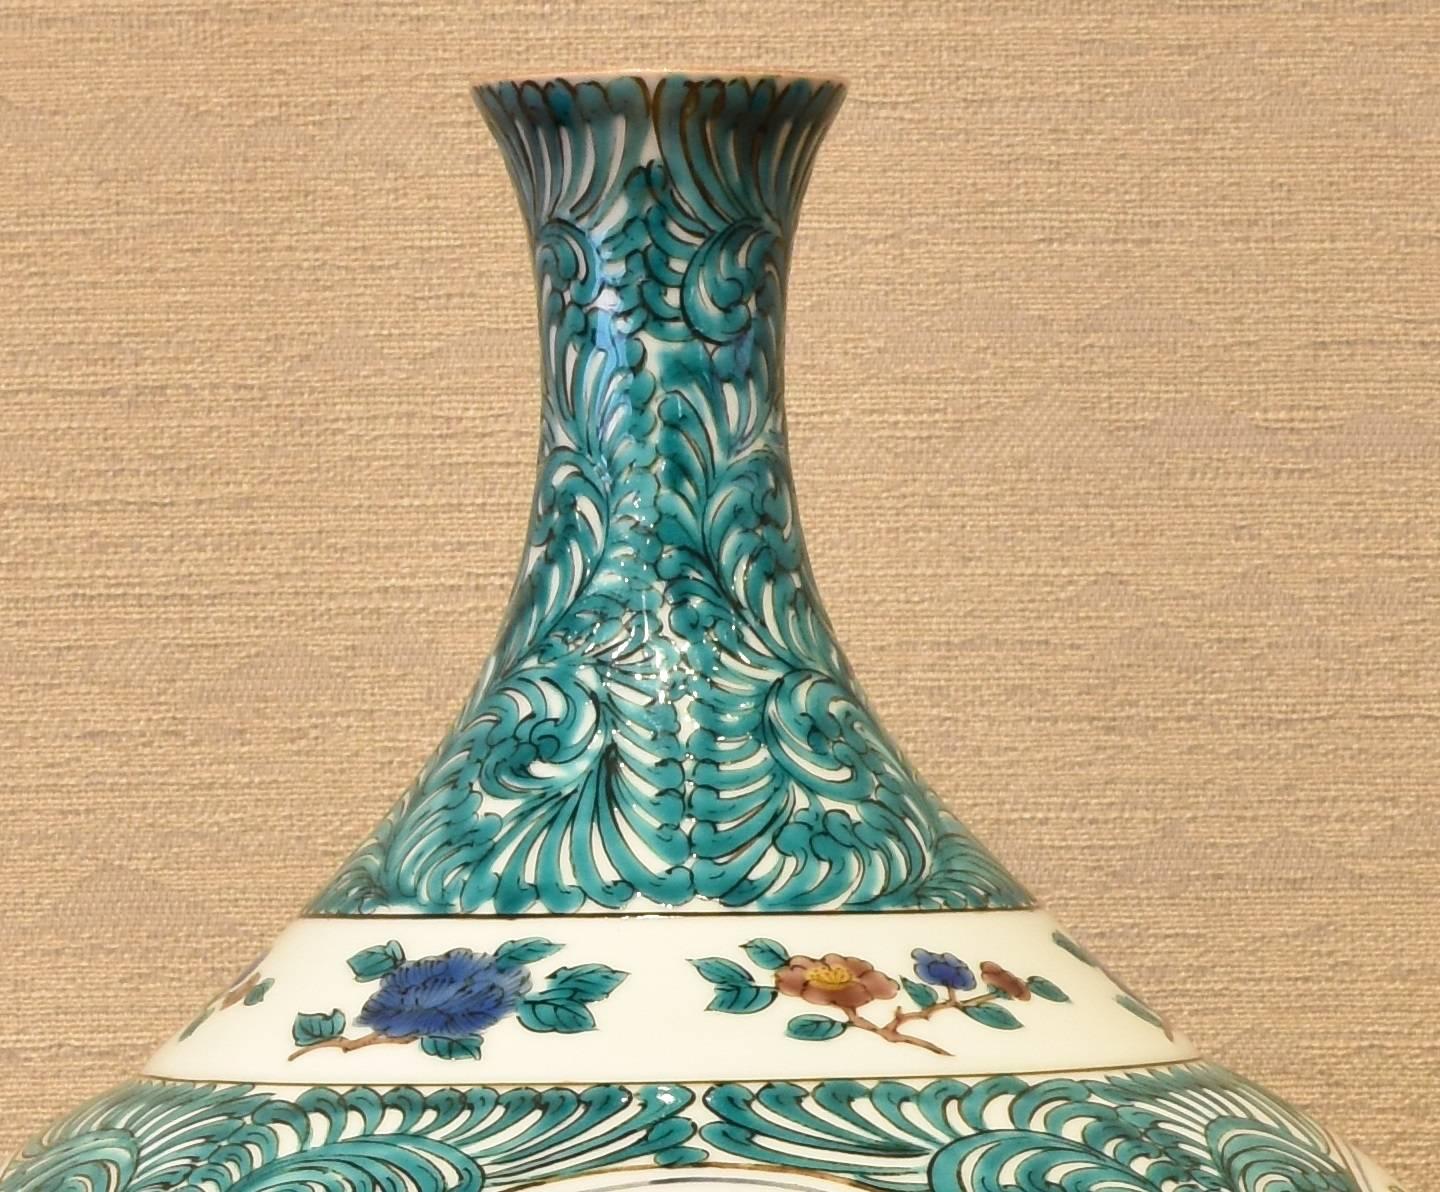 Hand-Painted Japanese Green Red White Porcelain Vase by Contemporary Master Artist